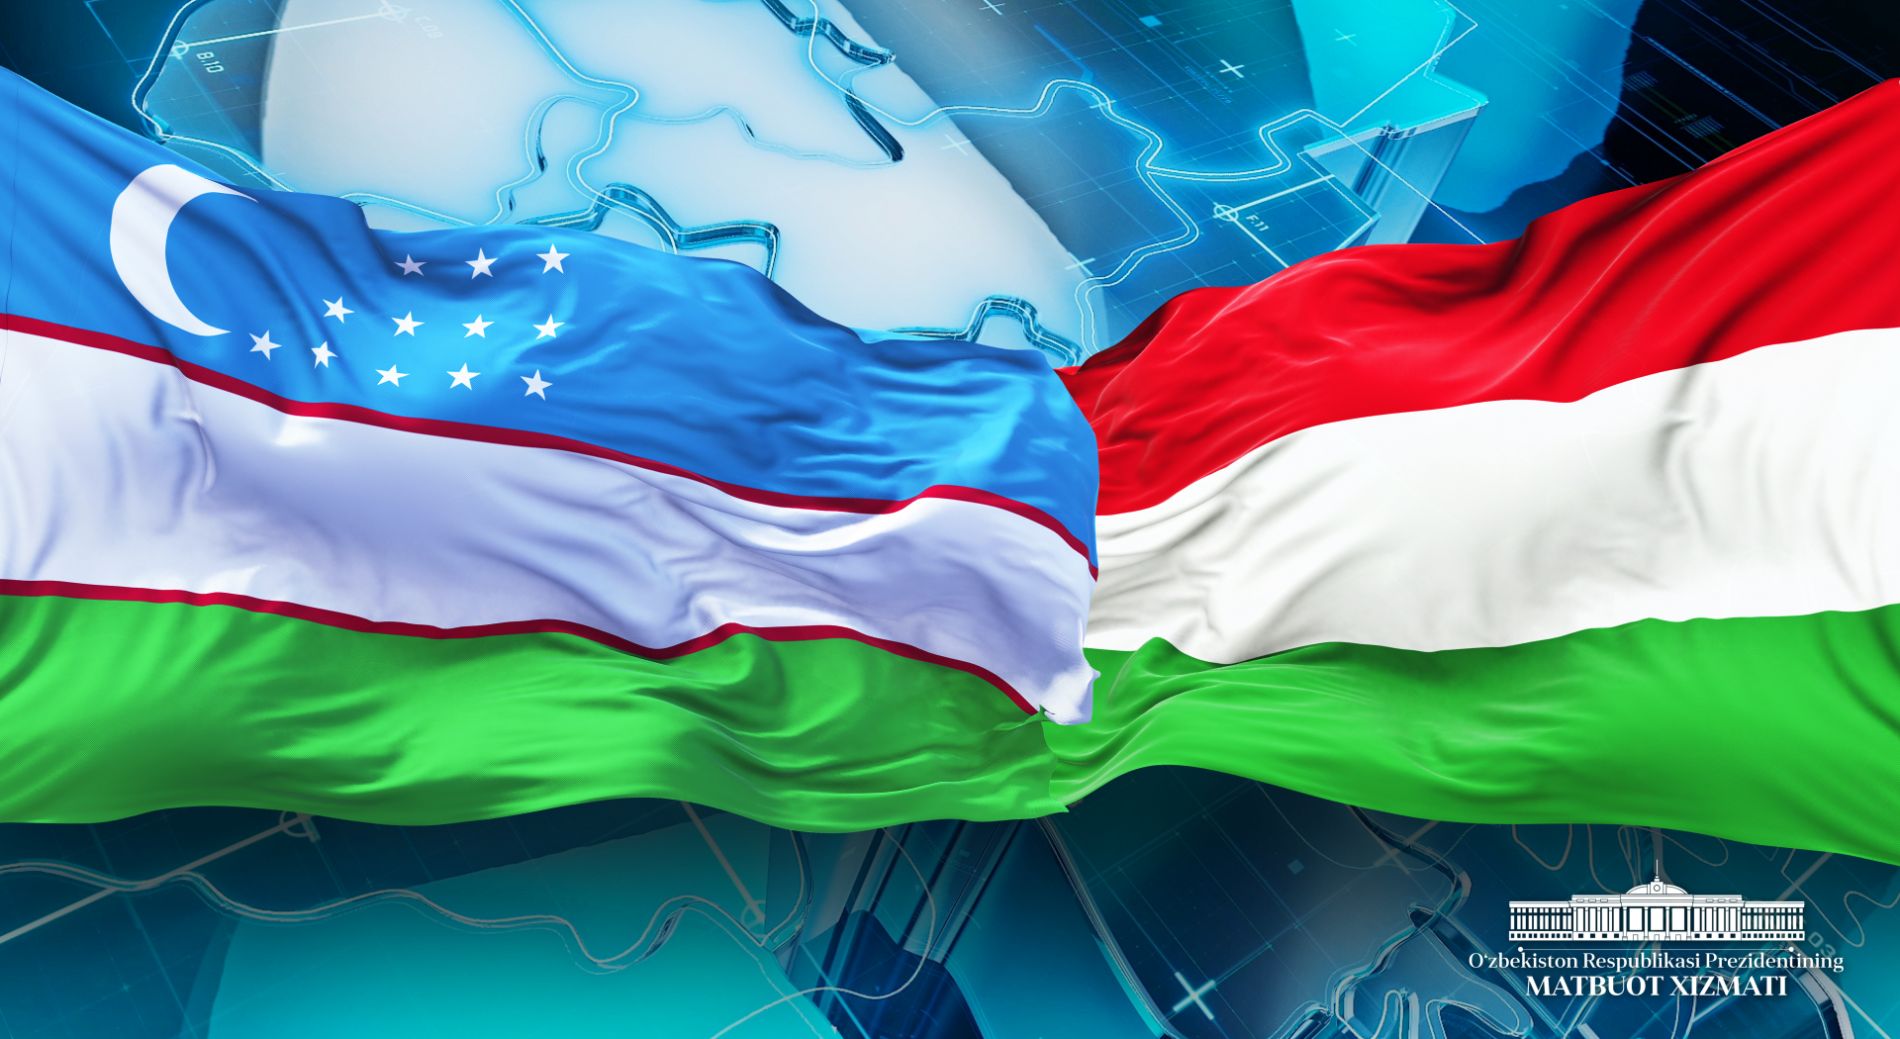 Ministers of Uzbekistan and Hungary fortify bilateral ties in diplomatic meeting 